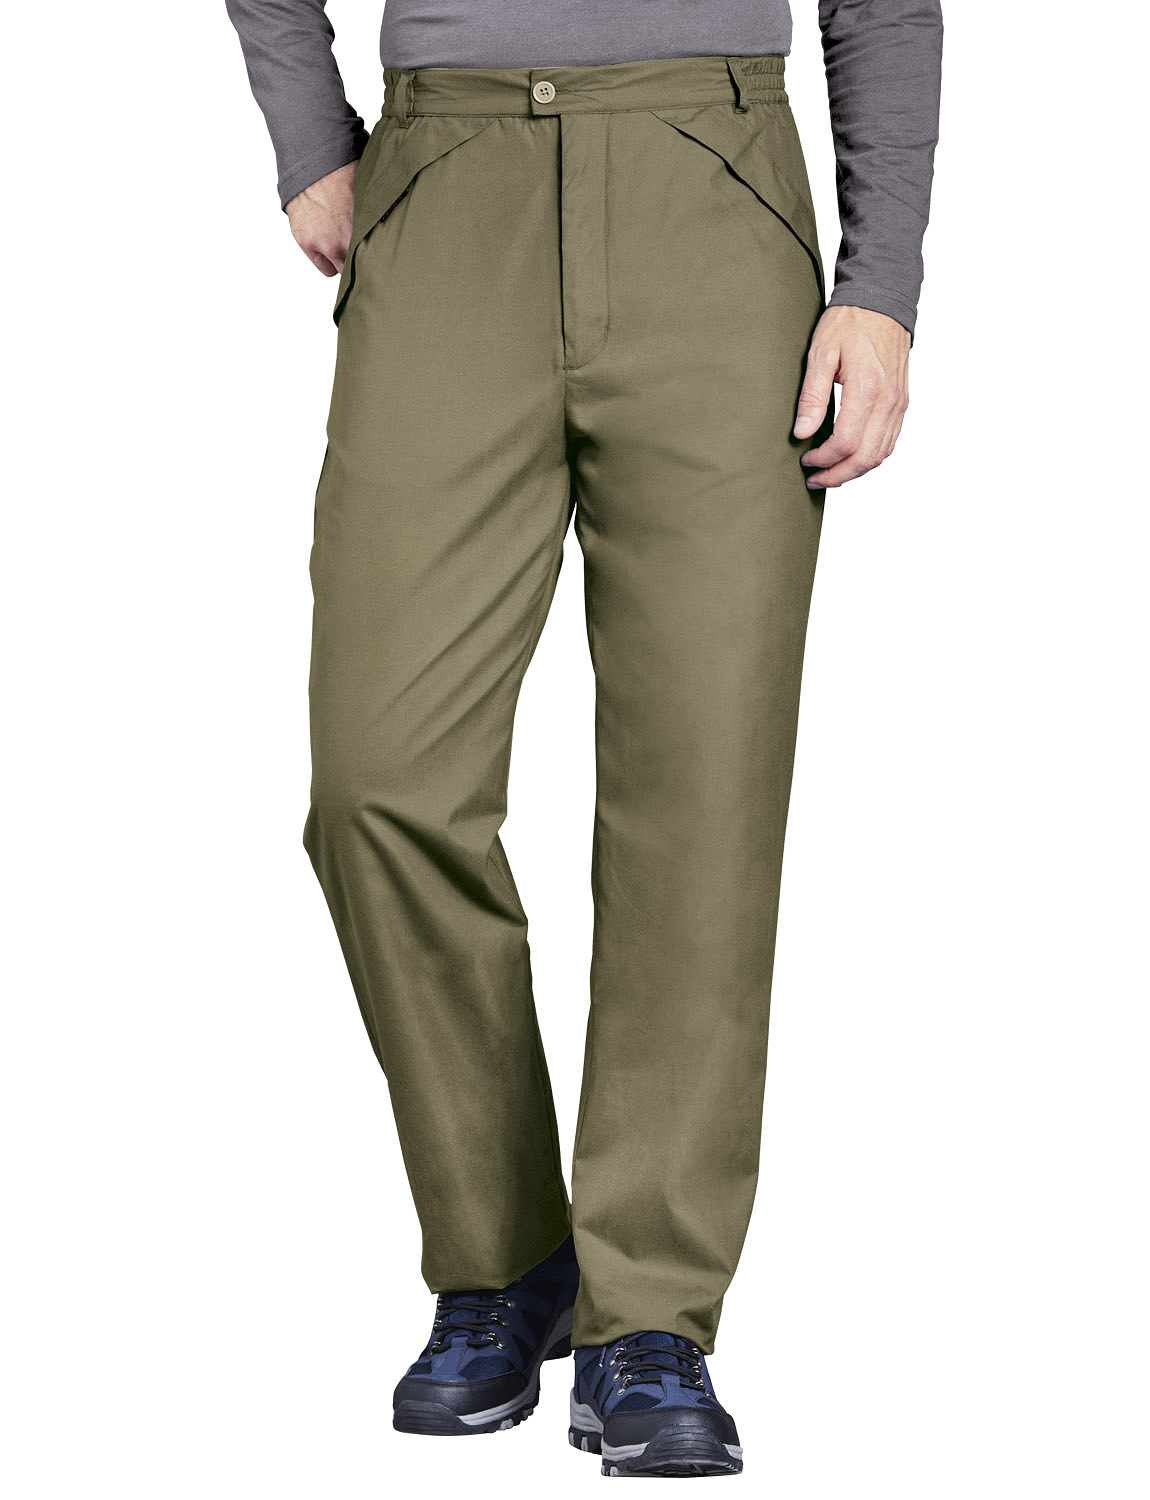 Chums fleece-lined water-resistant trouser | warm comfortable and | eBay